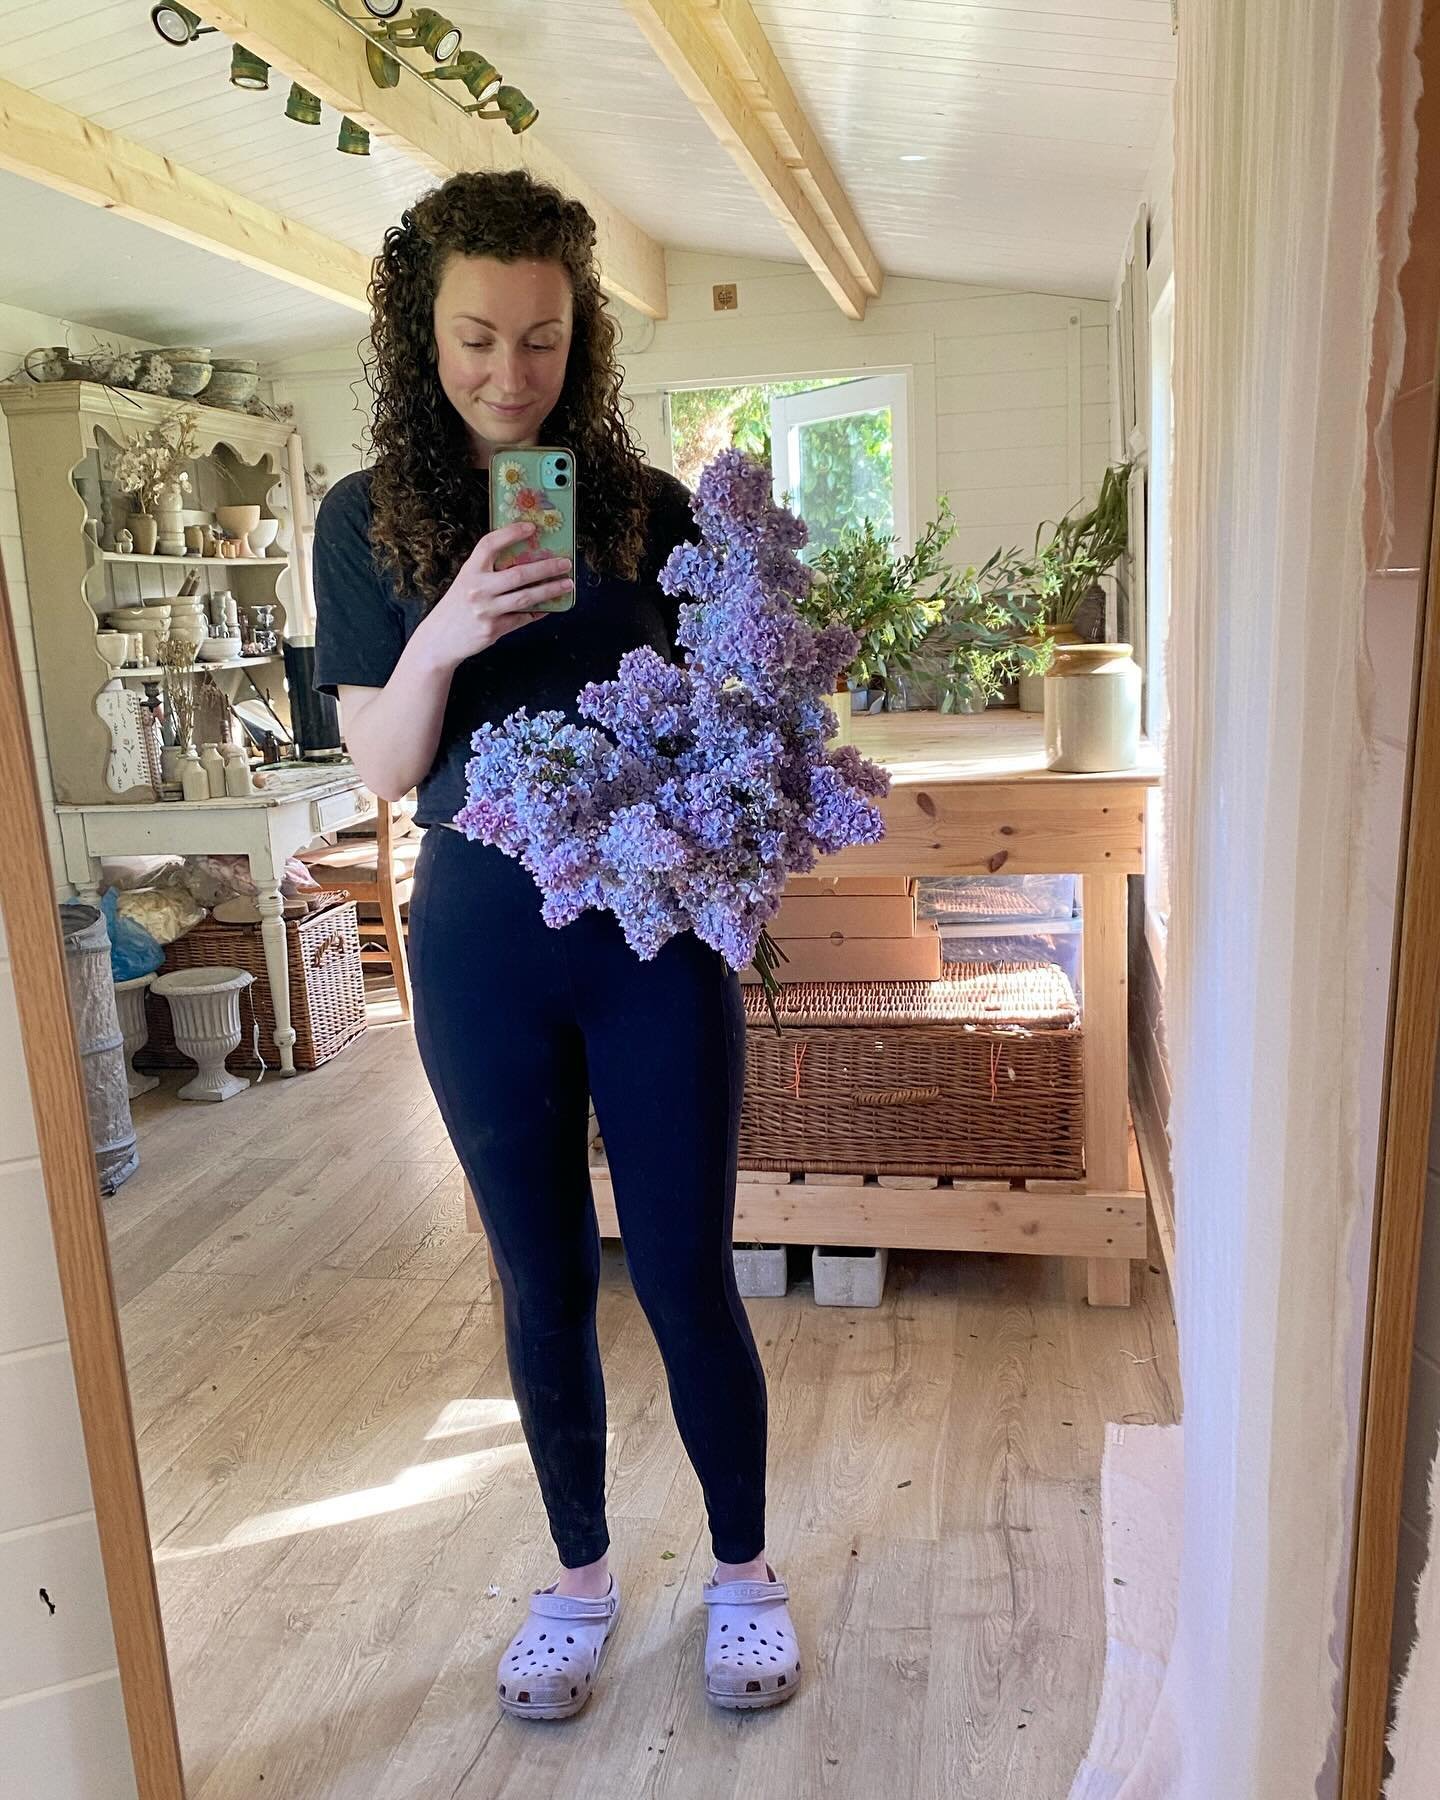 Matching footwear and flowers and further life and floral  April moments. Scroll for how several nights have ended..(Unintentional screenshot find whilst compiling this post) 🌝

Featuring lilac bringing the sweetest scent to the studio, the first Br